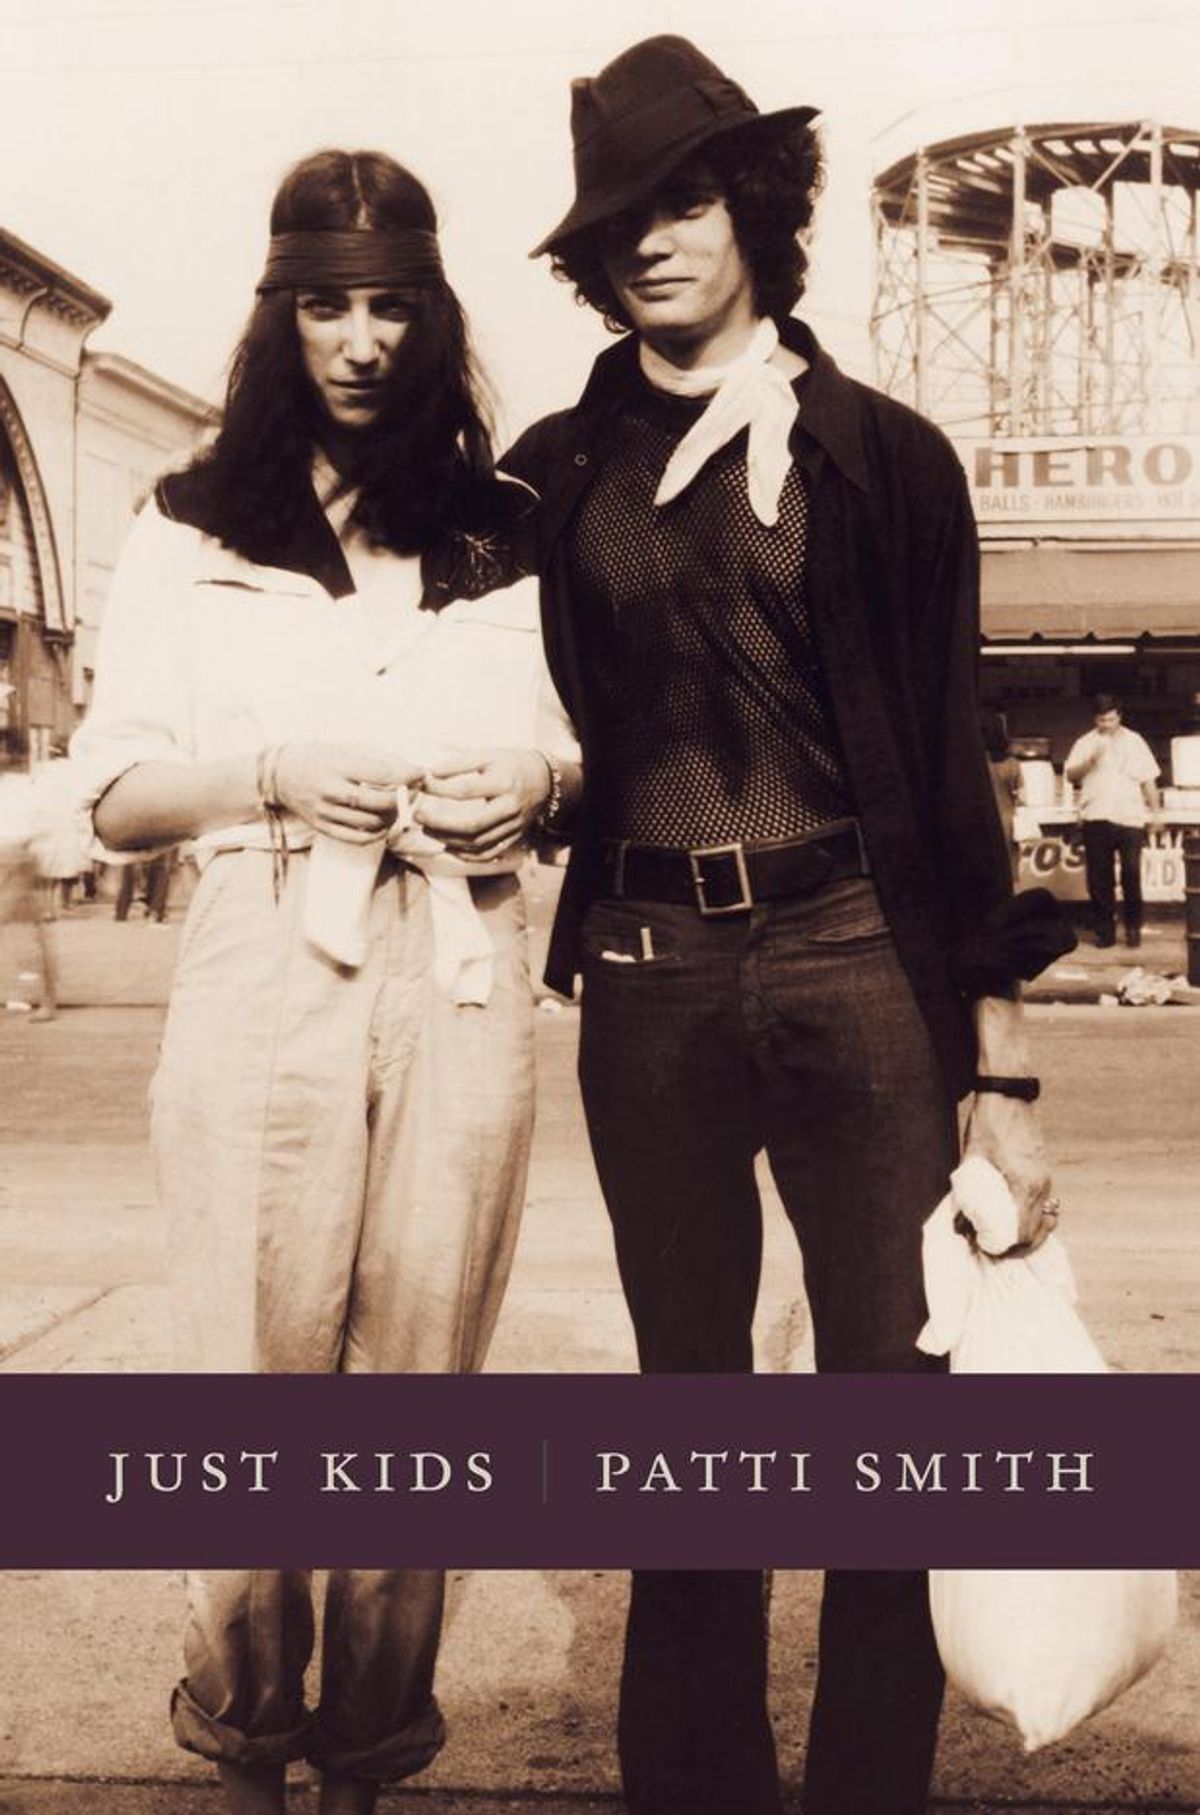 Patti Smith and Robert Mapplethorpe on the cover of her National Book Award-winning "Just Kids"